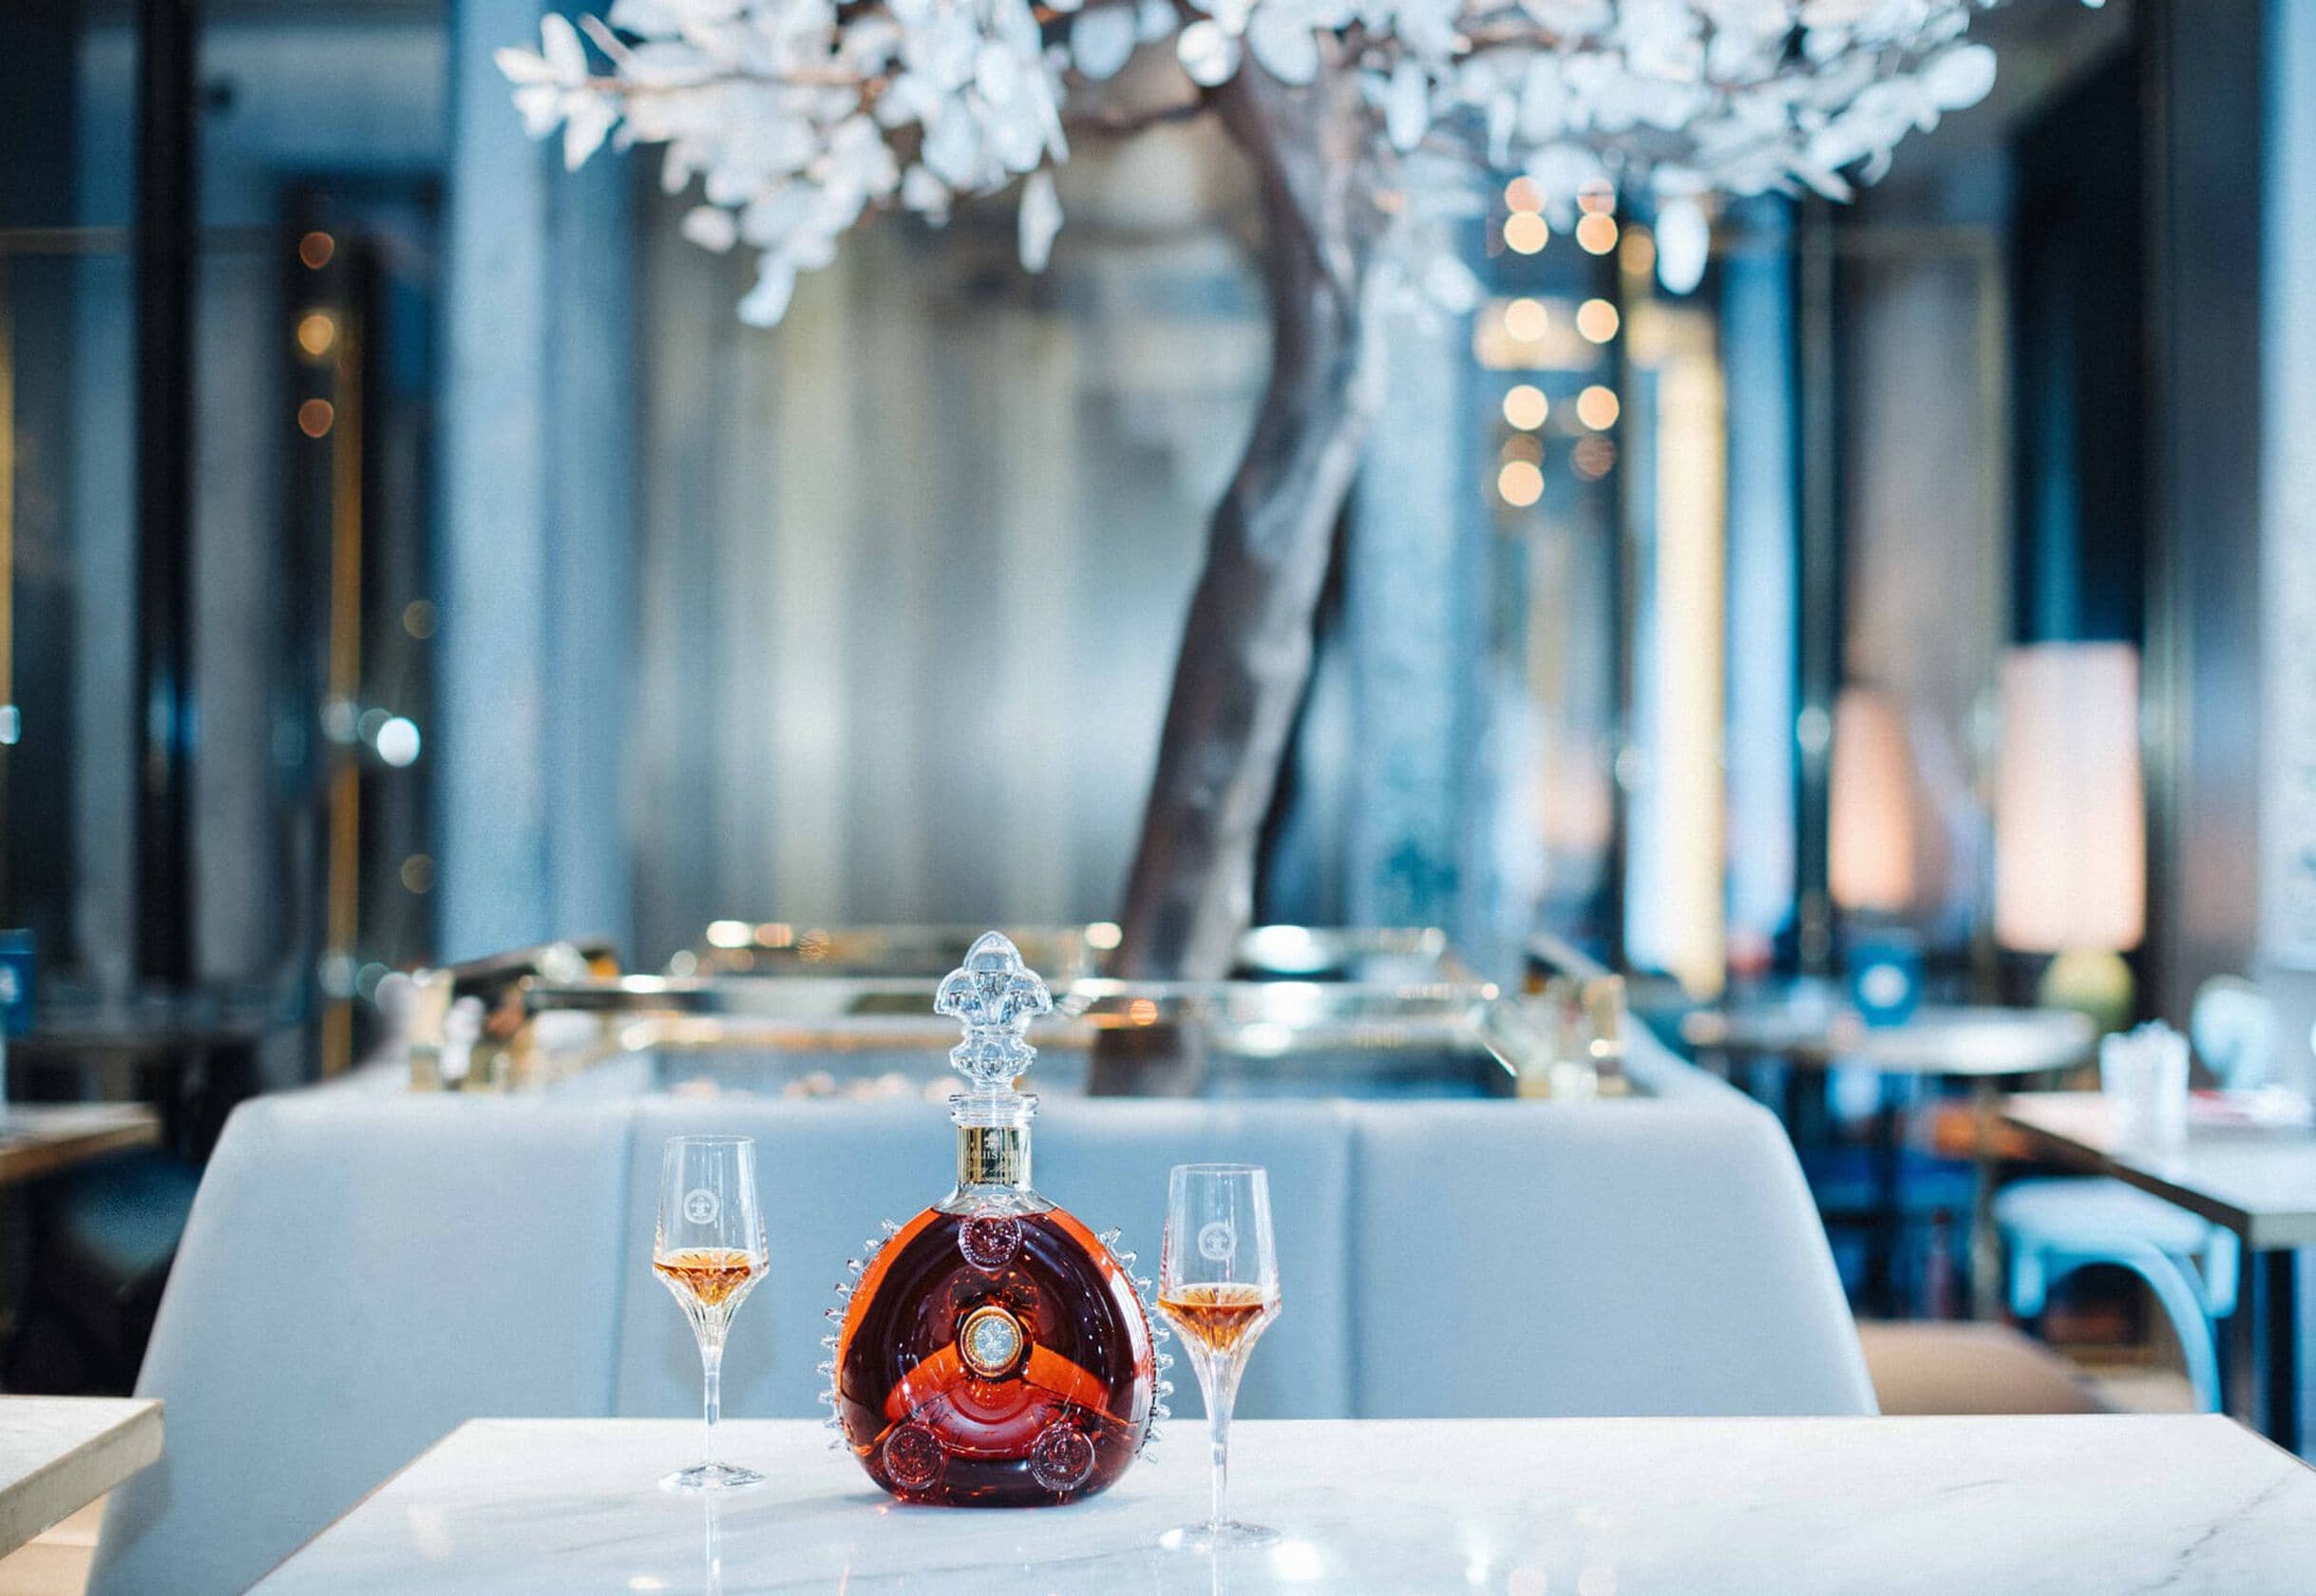 A photo of a LOUIS XIII decanter with two glasses on a restaurant table